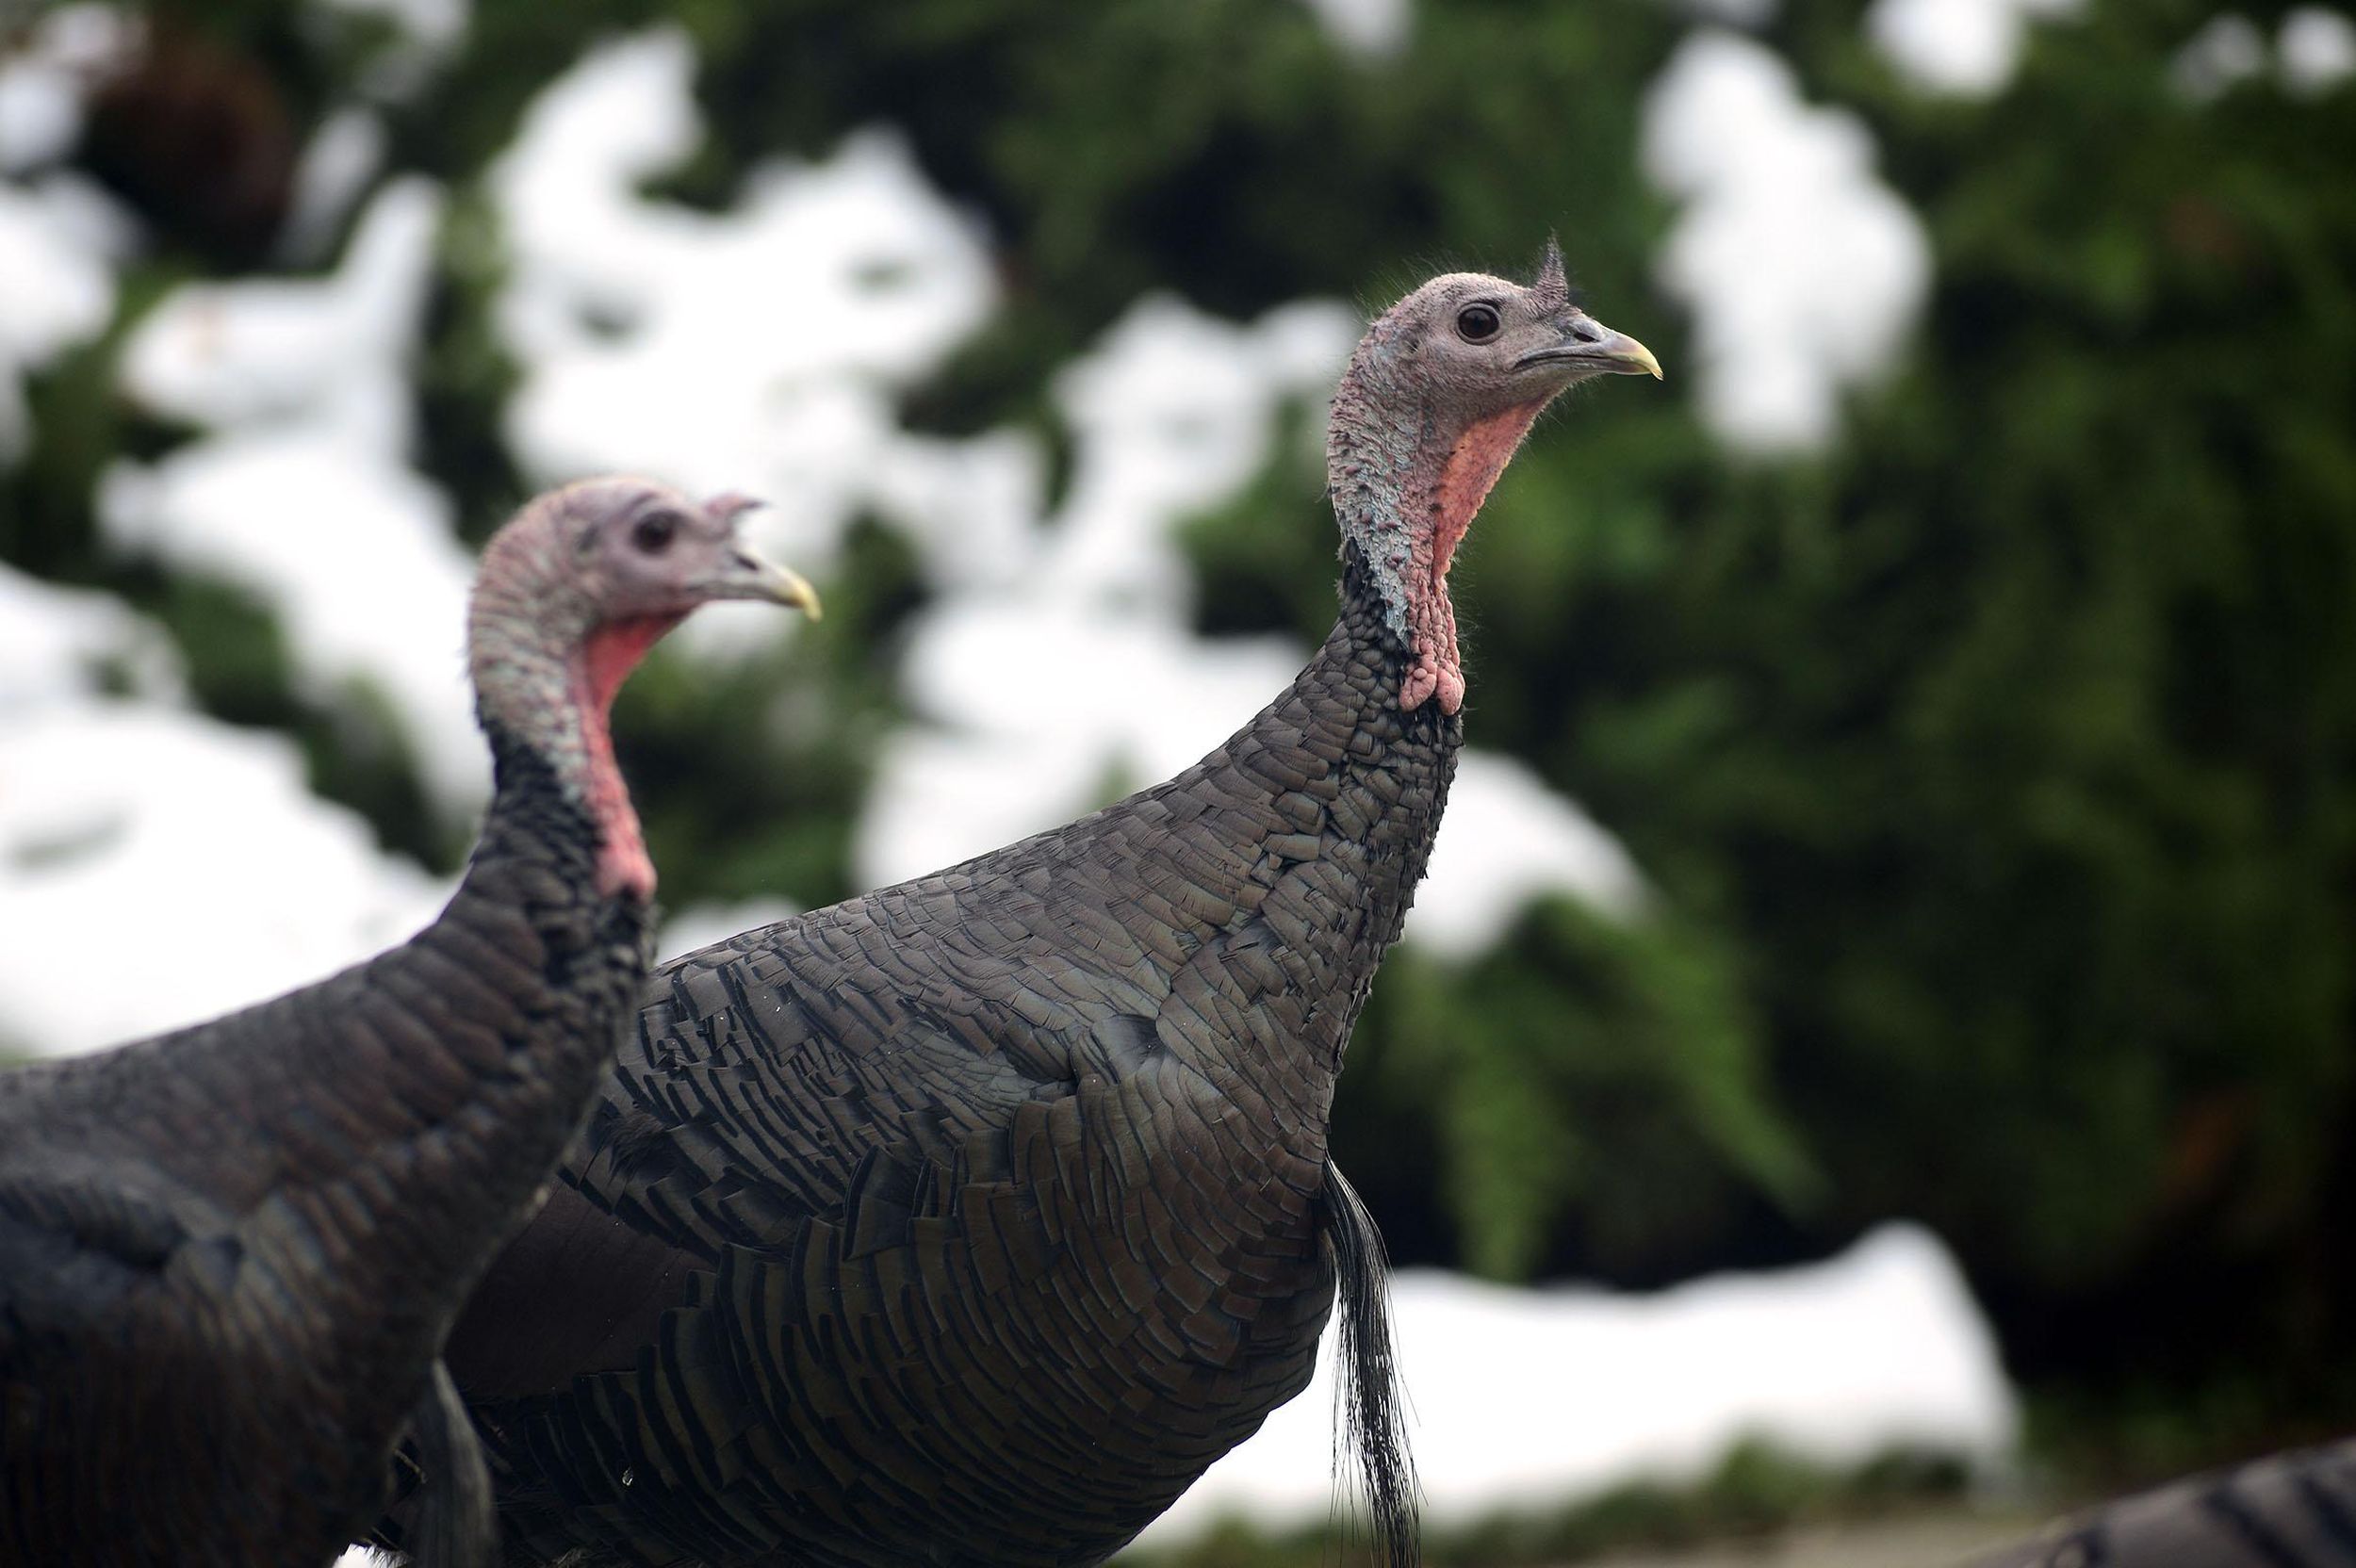 Inland Northwest S Thriving Turkey Population Is An Invasive Nuisance Or A Conservation Success Or Both The Spokesman Review